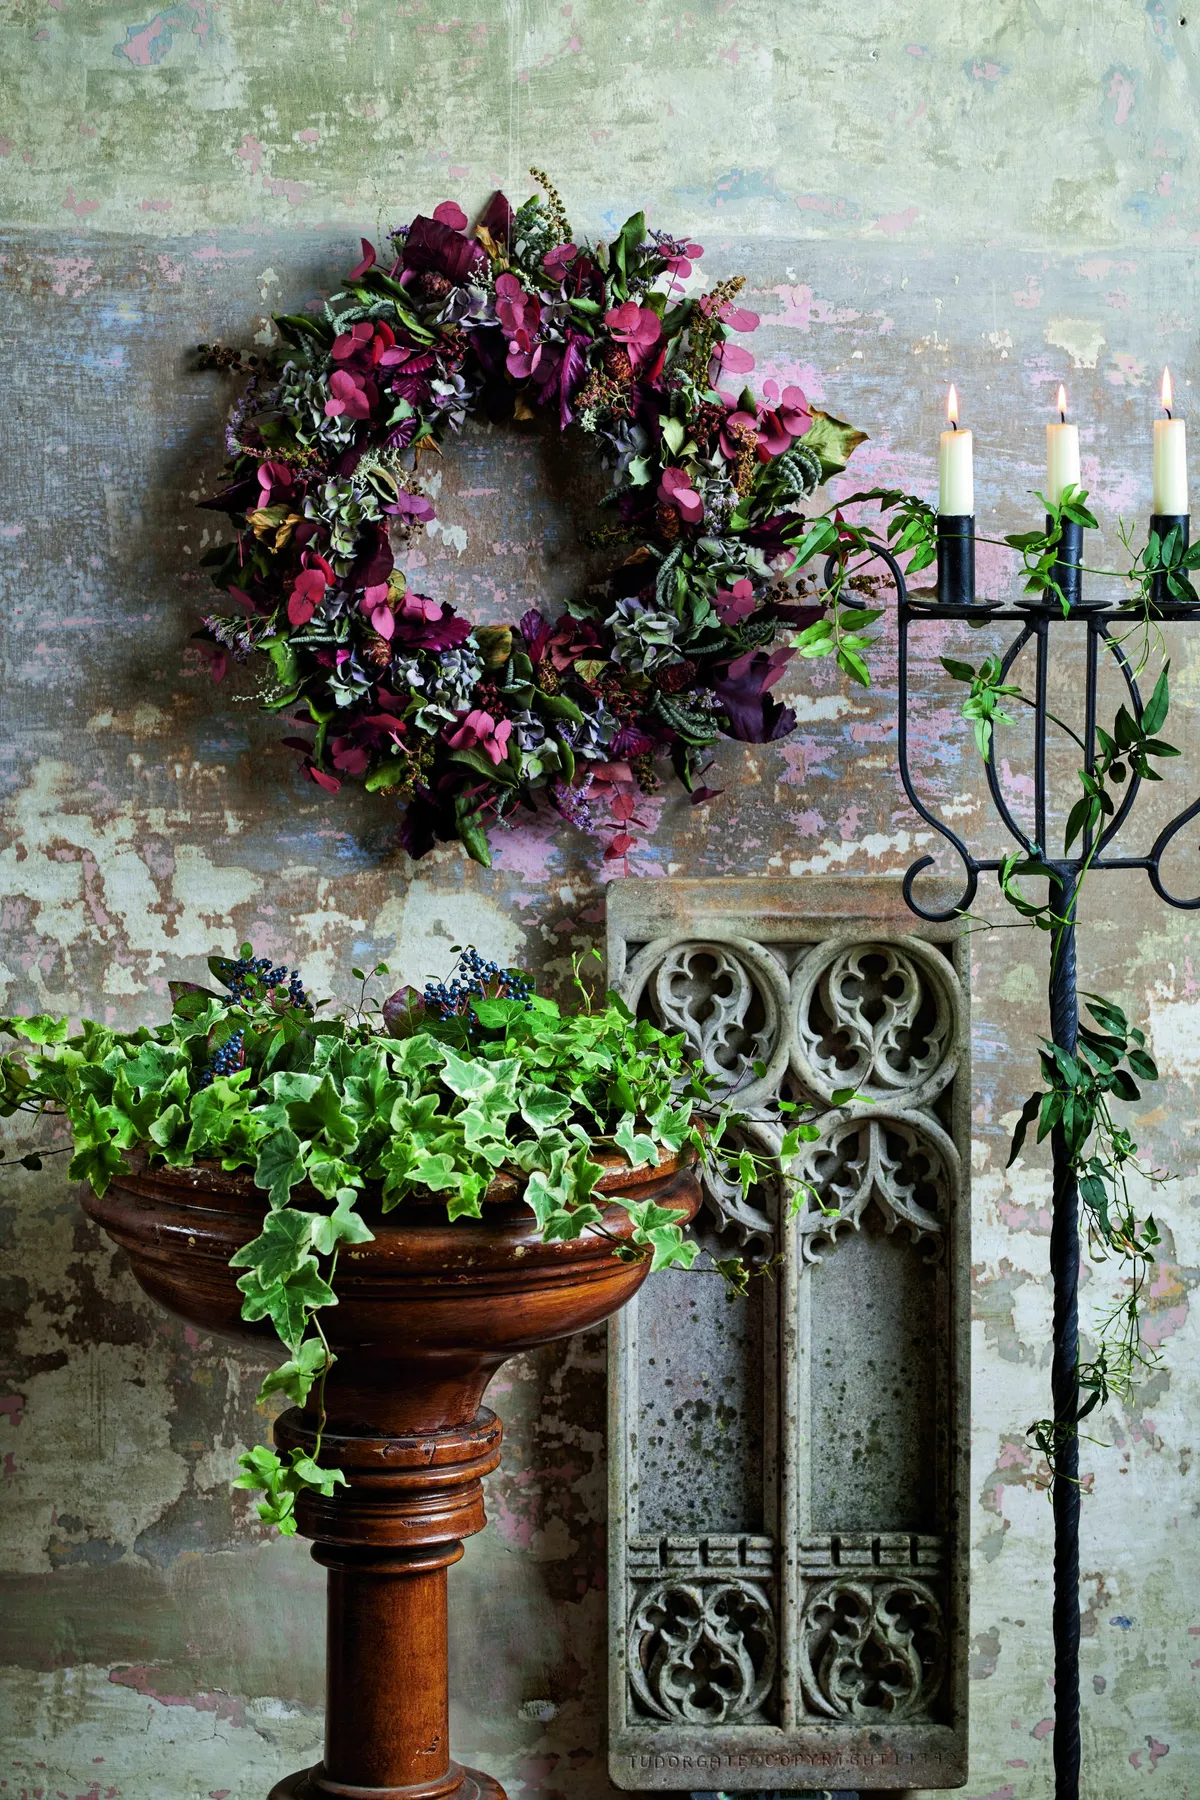 An alter and piece of stonework with a dried flower wreath and swathes of ivy.